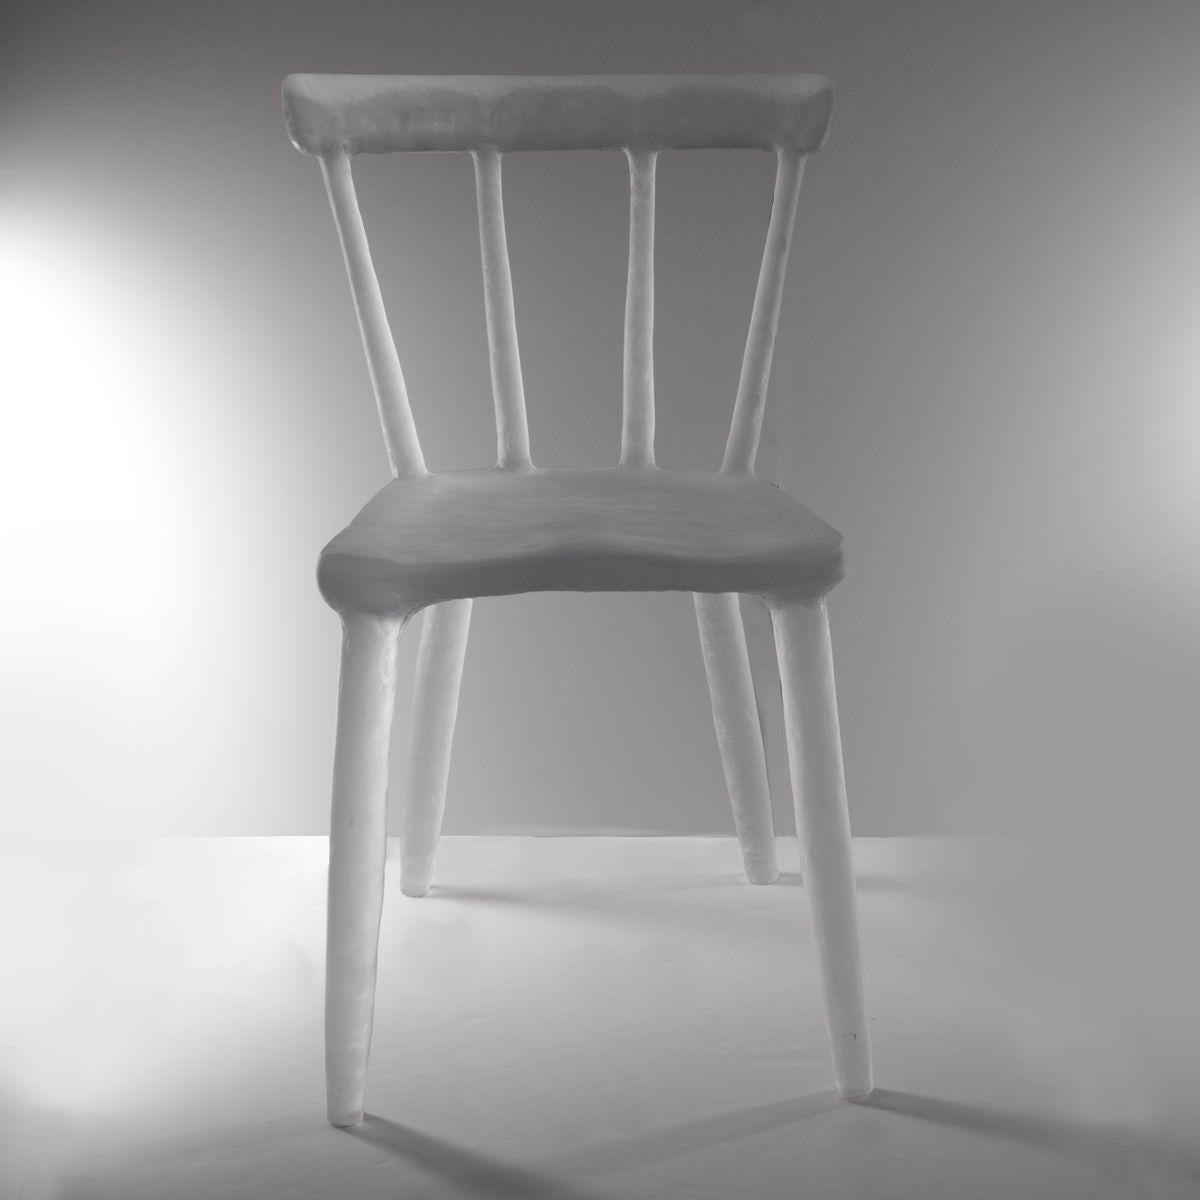 Glow Chair 'Grey' in Recycled Plastic In New Condition For Sale In West Hollywood, CA